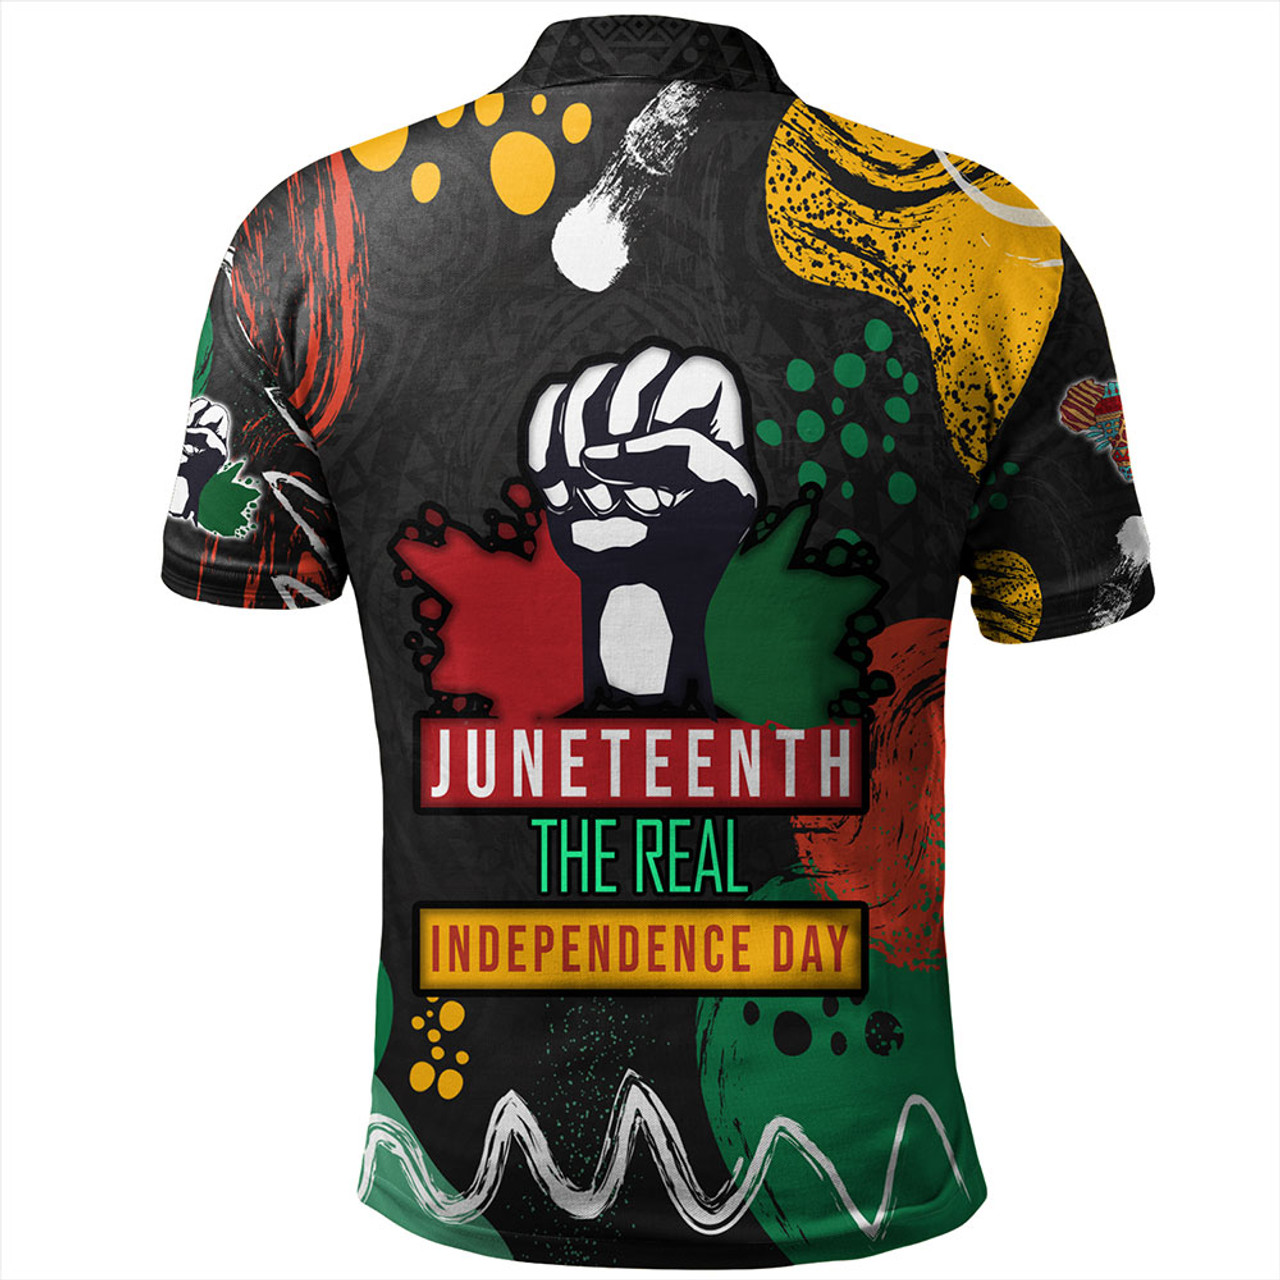 Juneteenth The Real Independence Day Polo Shirt